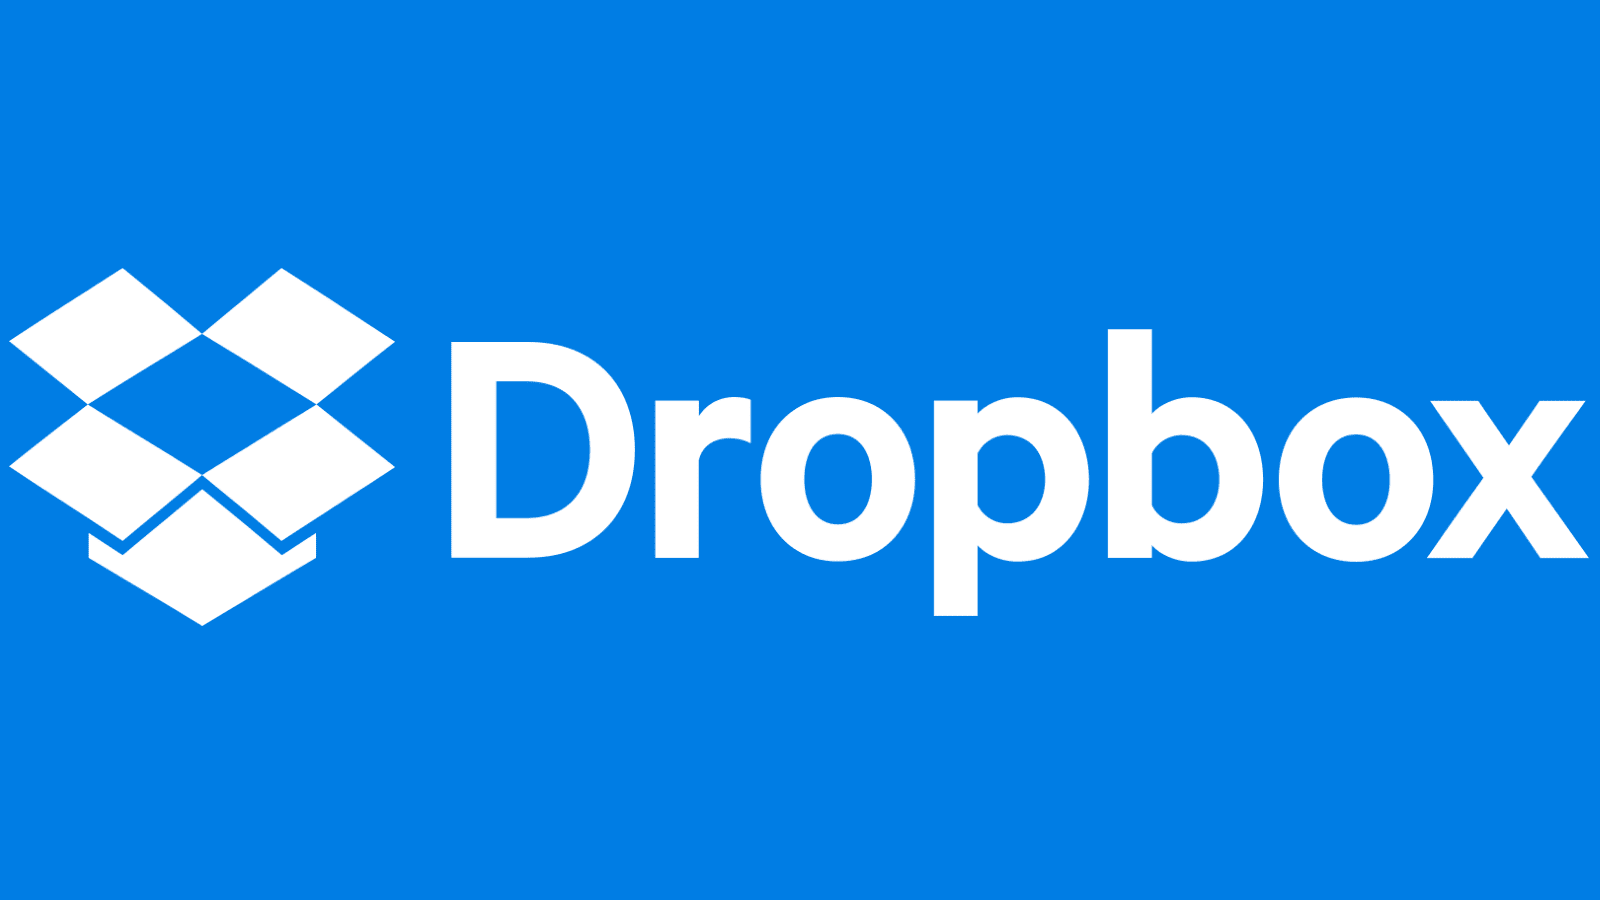 Download dropbox for windows